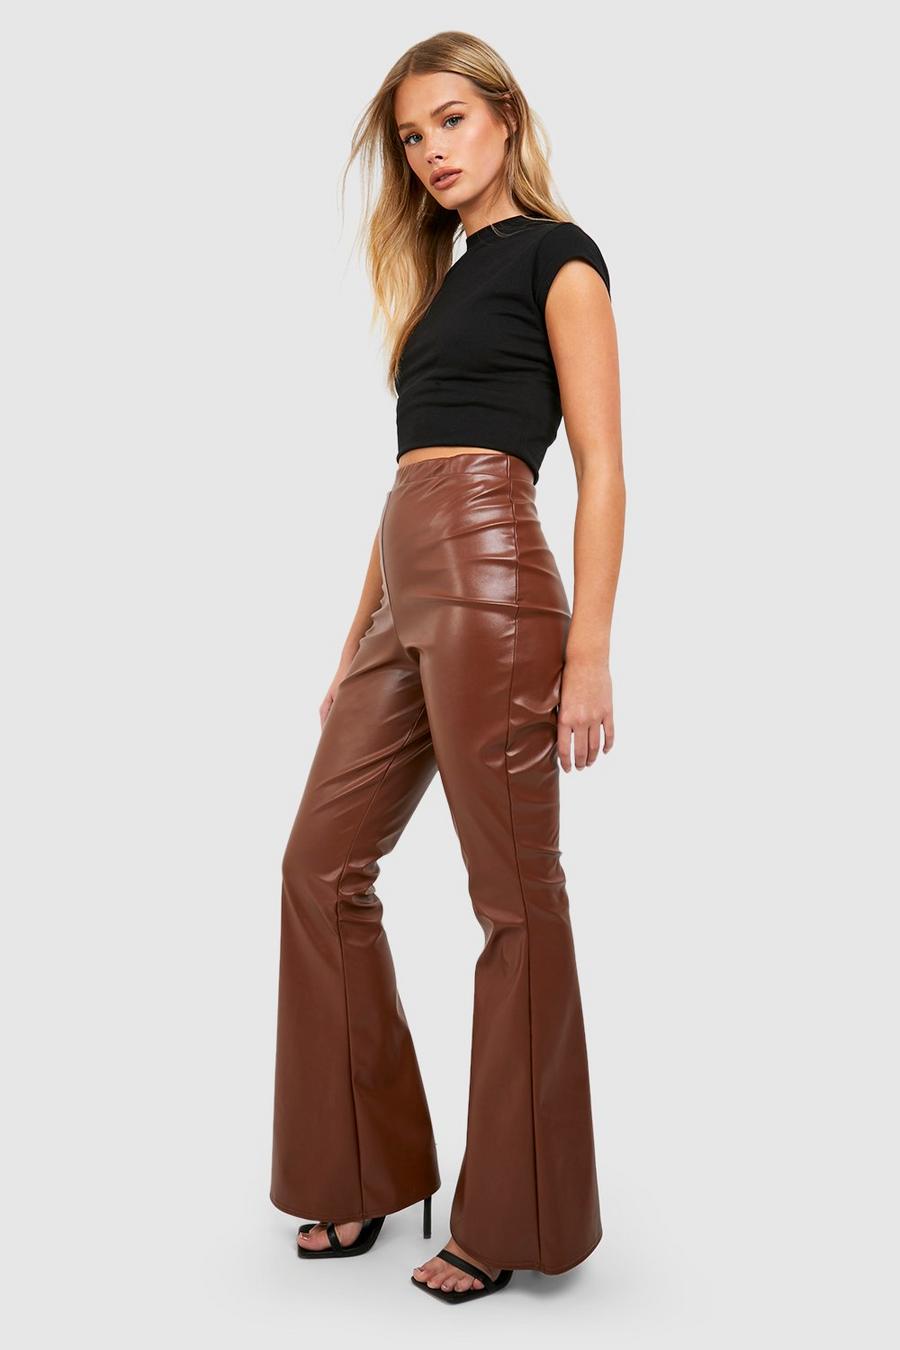 Tan Matte Faux Leather High Waisted Flared Pants